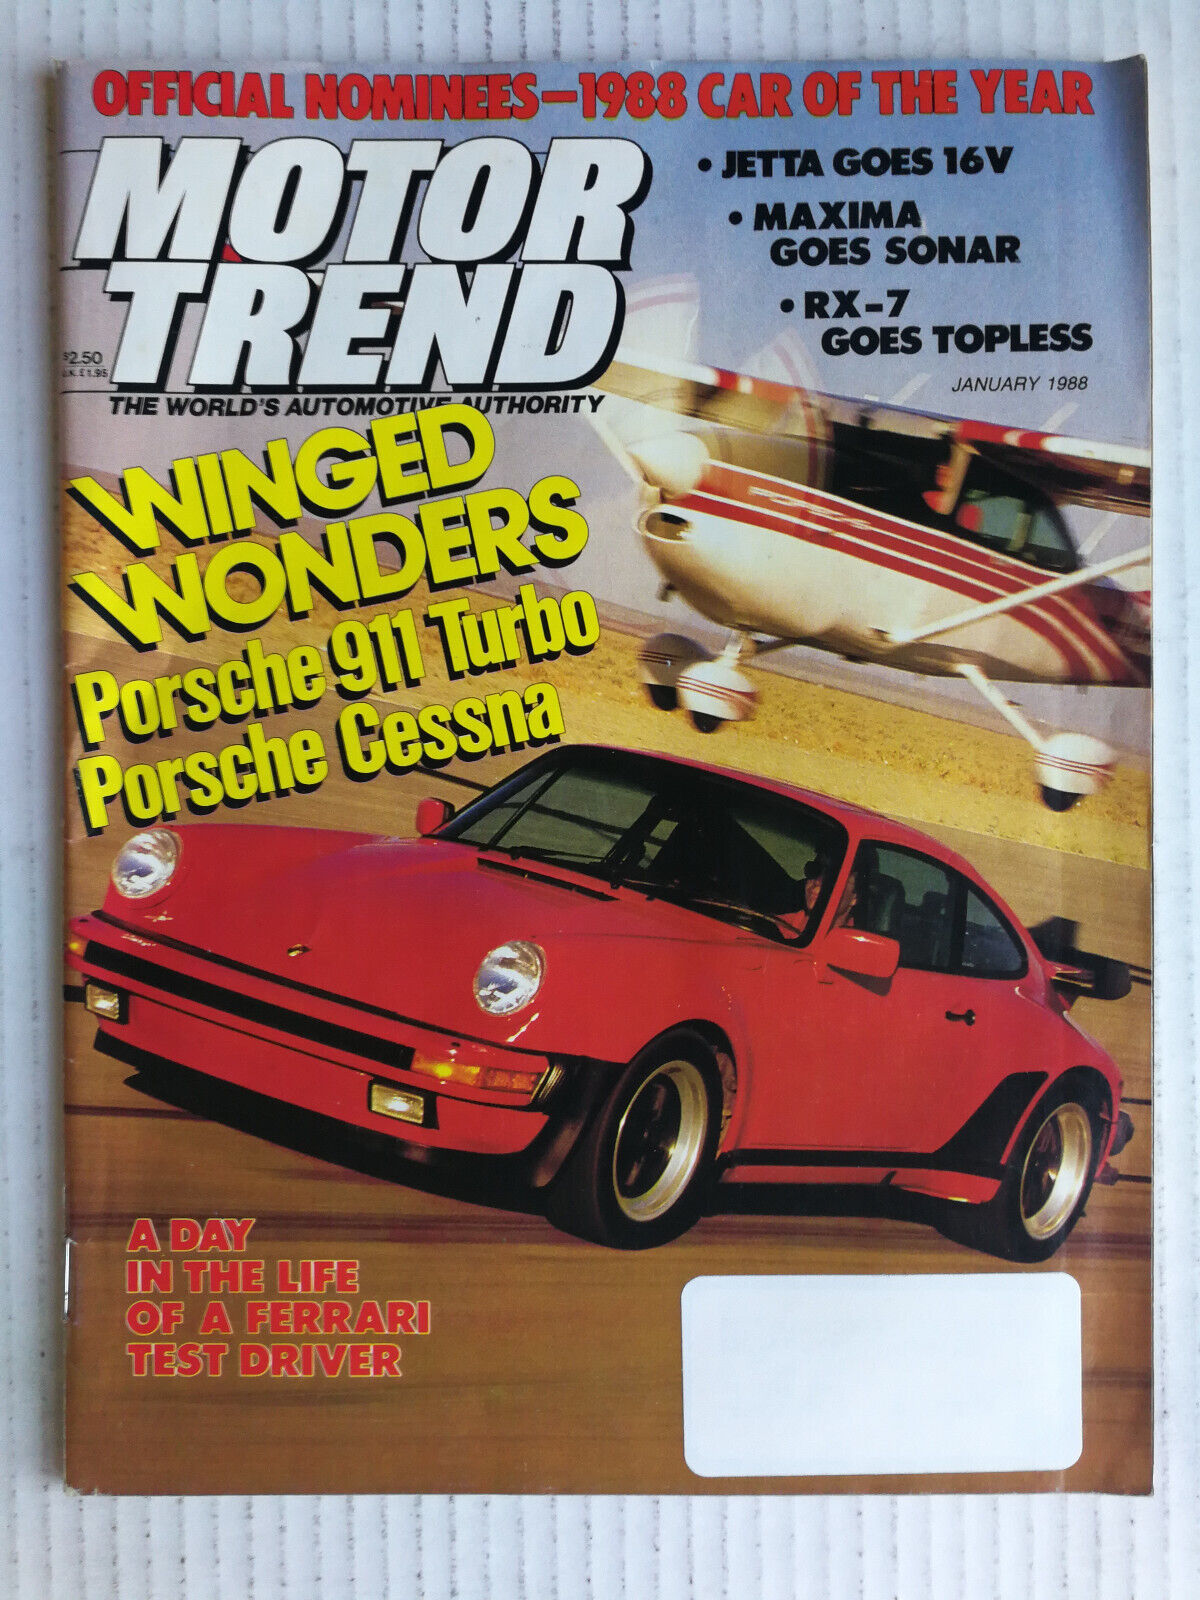 Motor Trend Magazine 1988 - The Complete Year - All 12 Issues